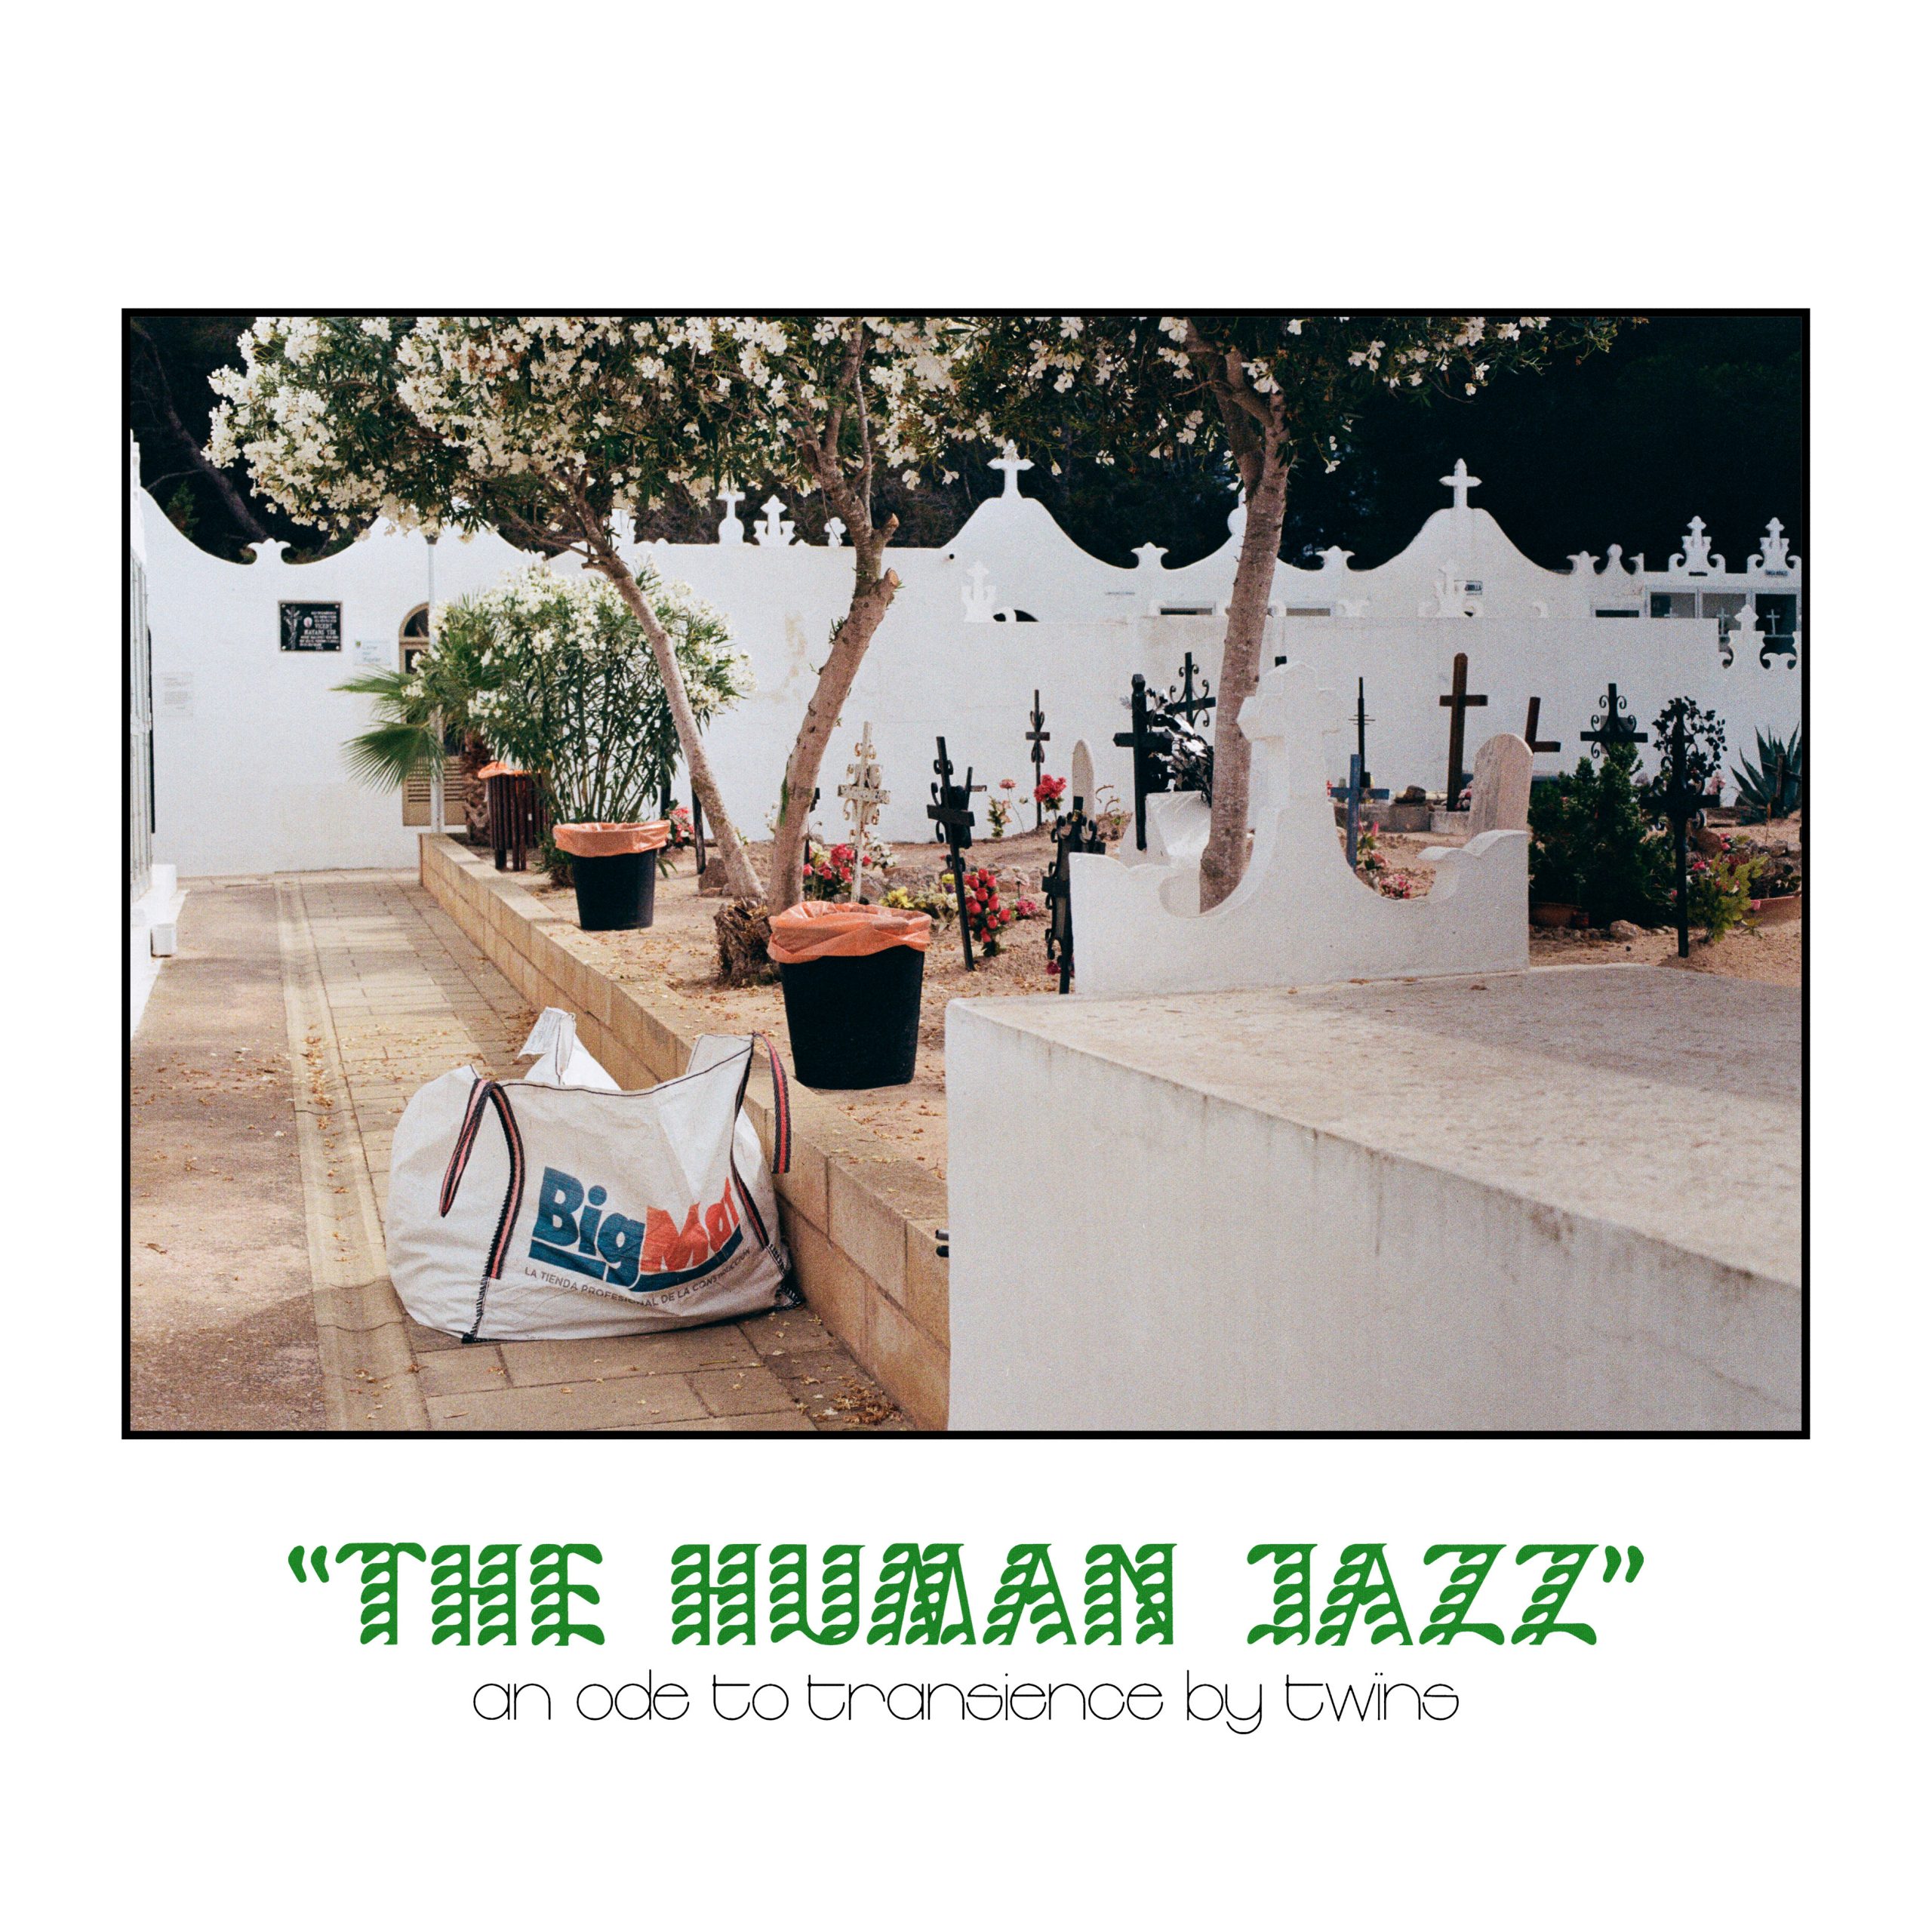 STEREO EMBERS EXCLUSIVE ALBUM PREVIEW – “The Human Jazz” from Berlin’s TWÏNS